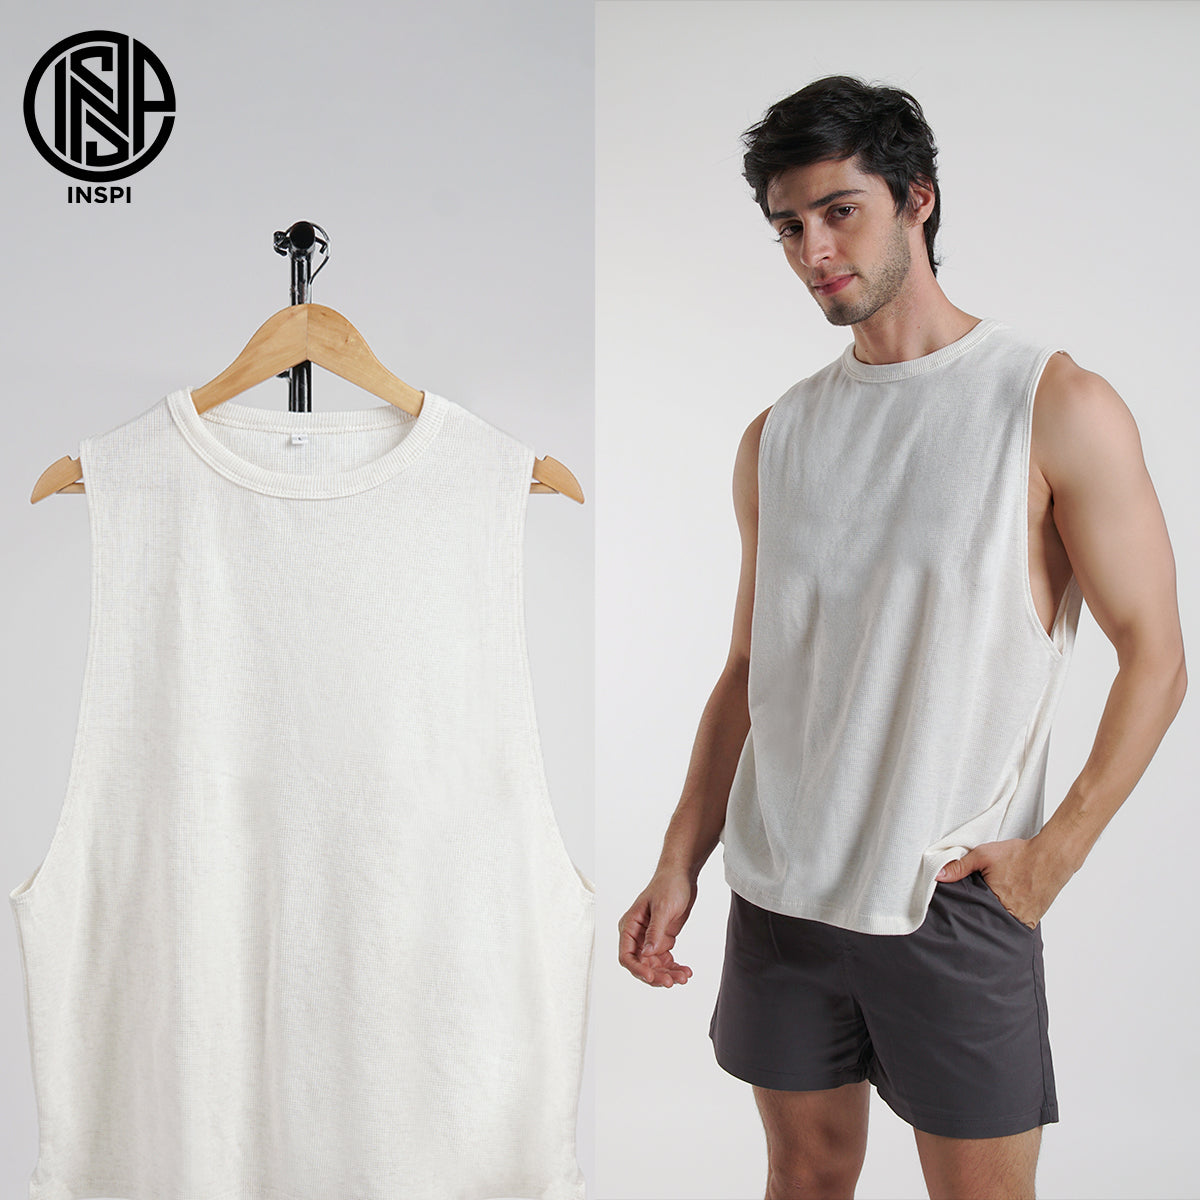 INSPI Waffle Muscle Tee Ivory White Sando for Men Plain Sleeveless Tank Top Gym Workout Exercise Beach Outfit